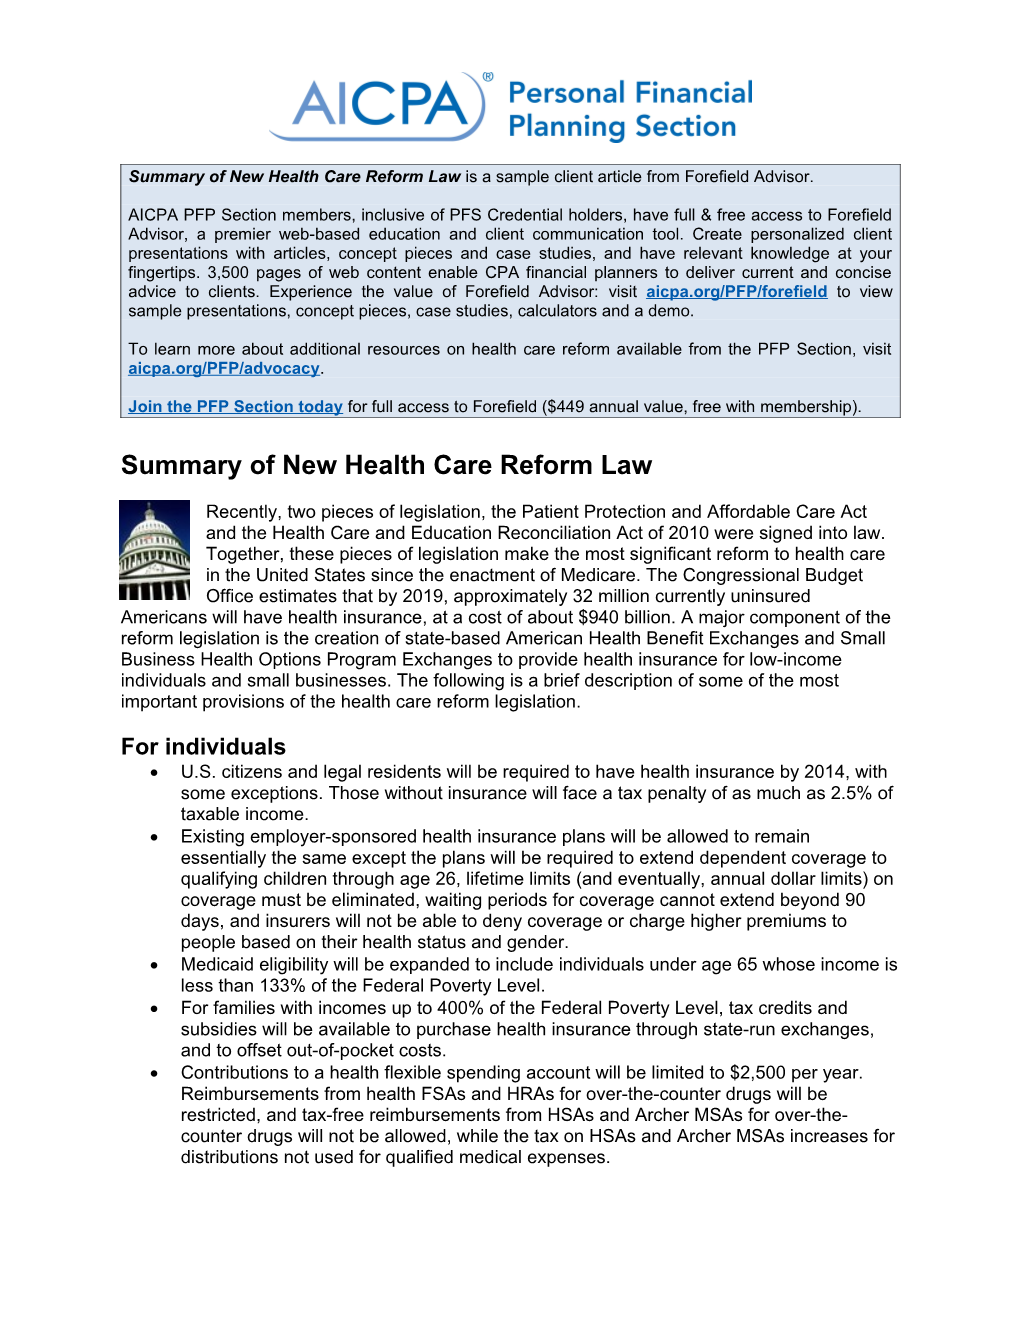 Client Summary of Health Care Reform